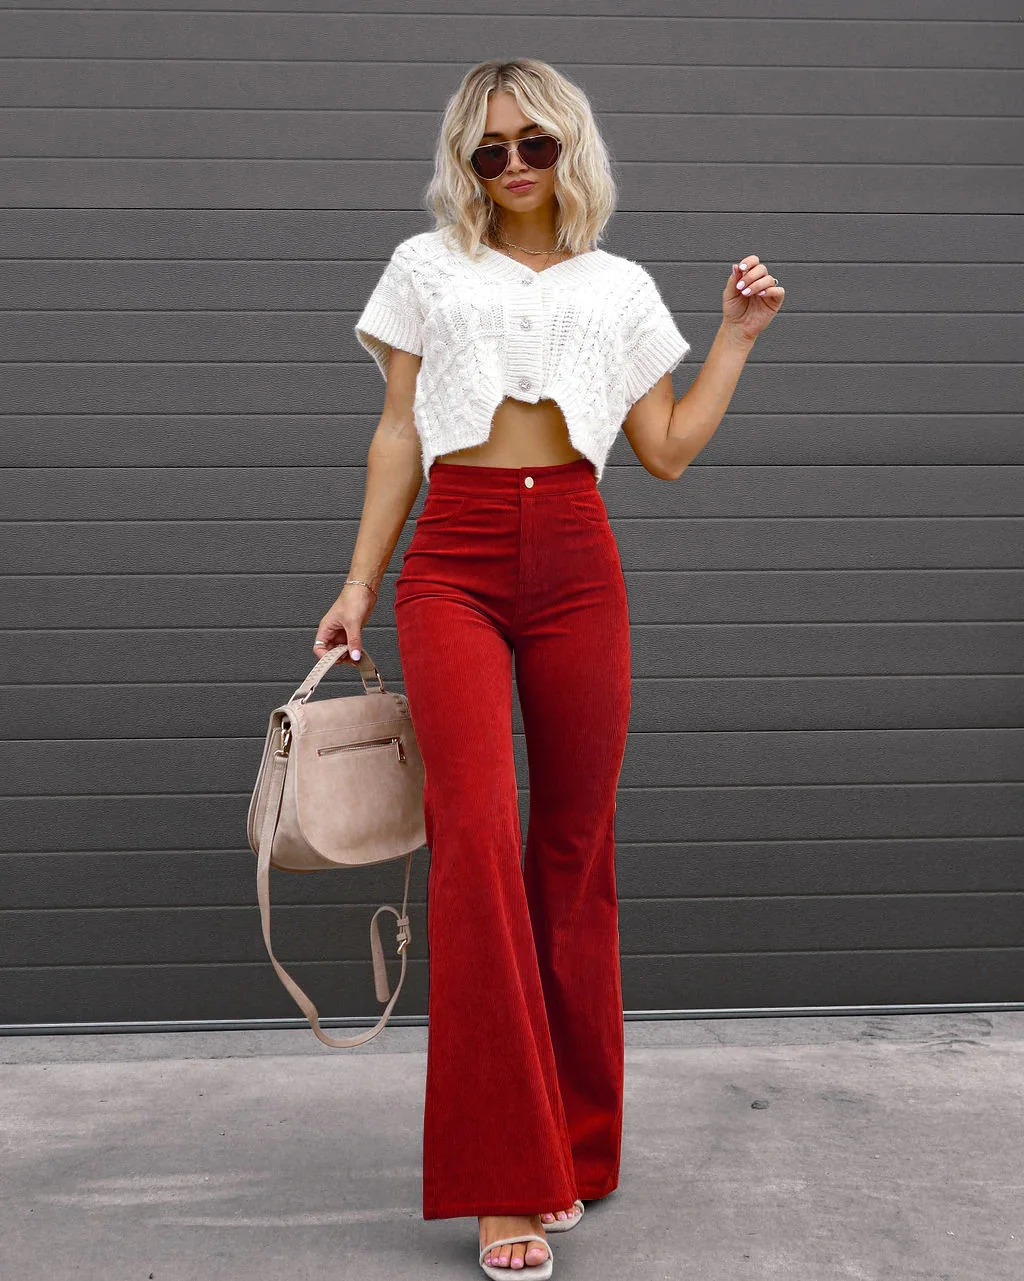 

Casual Autumn Winter Corduroy Pants for Women Solid High Waist Flare Pants Stretchy Straight Bell Bottom Trousers with Pockets